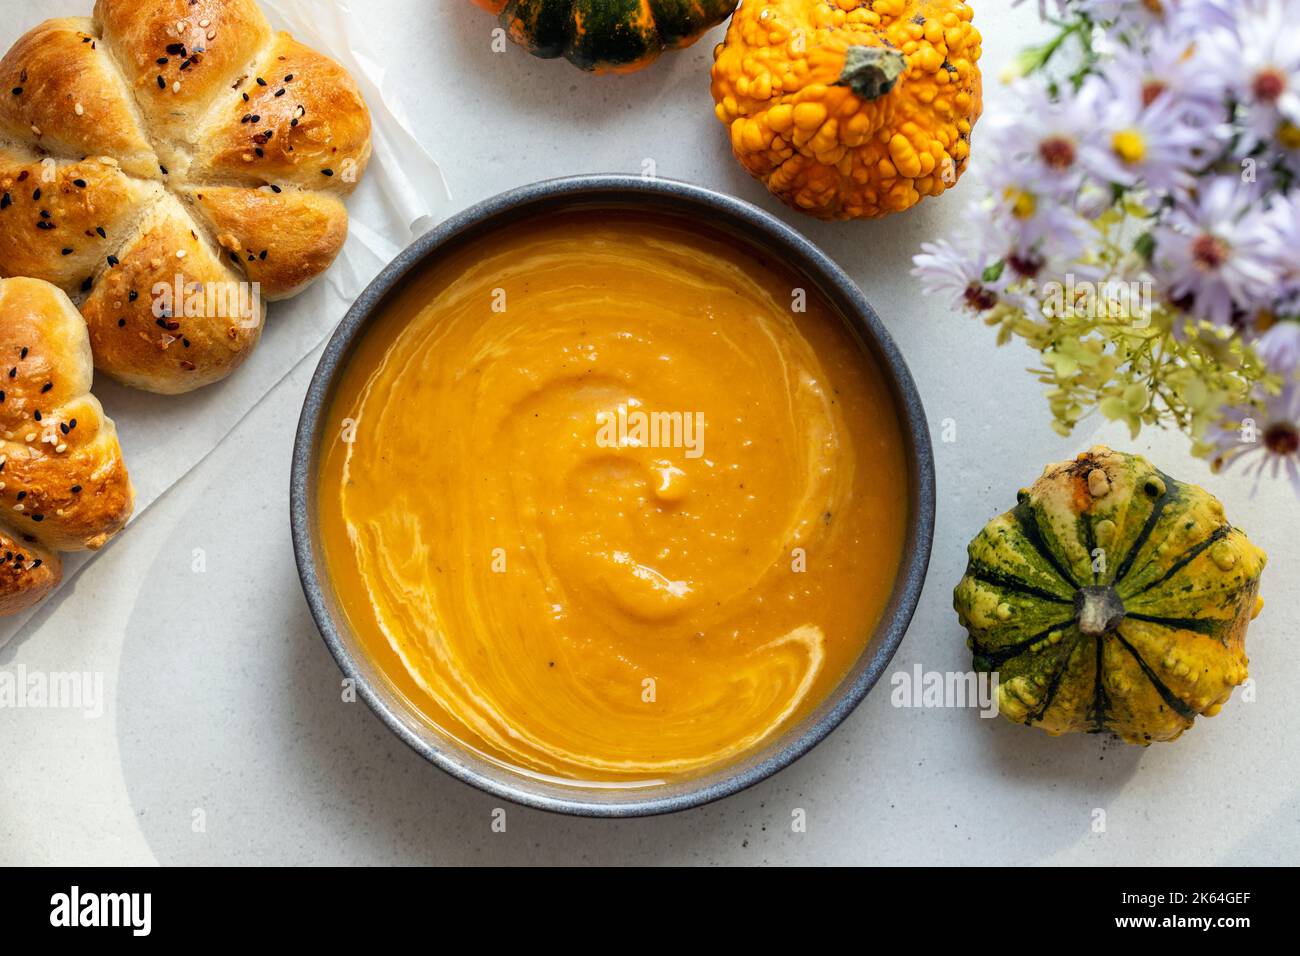 Pumkin soup with freshly baked bread roll Stock Photo